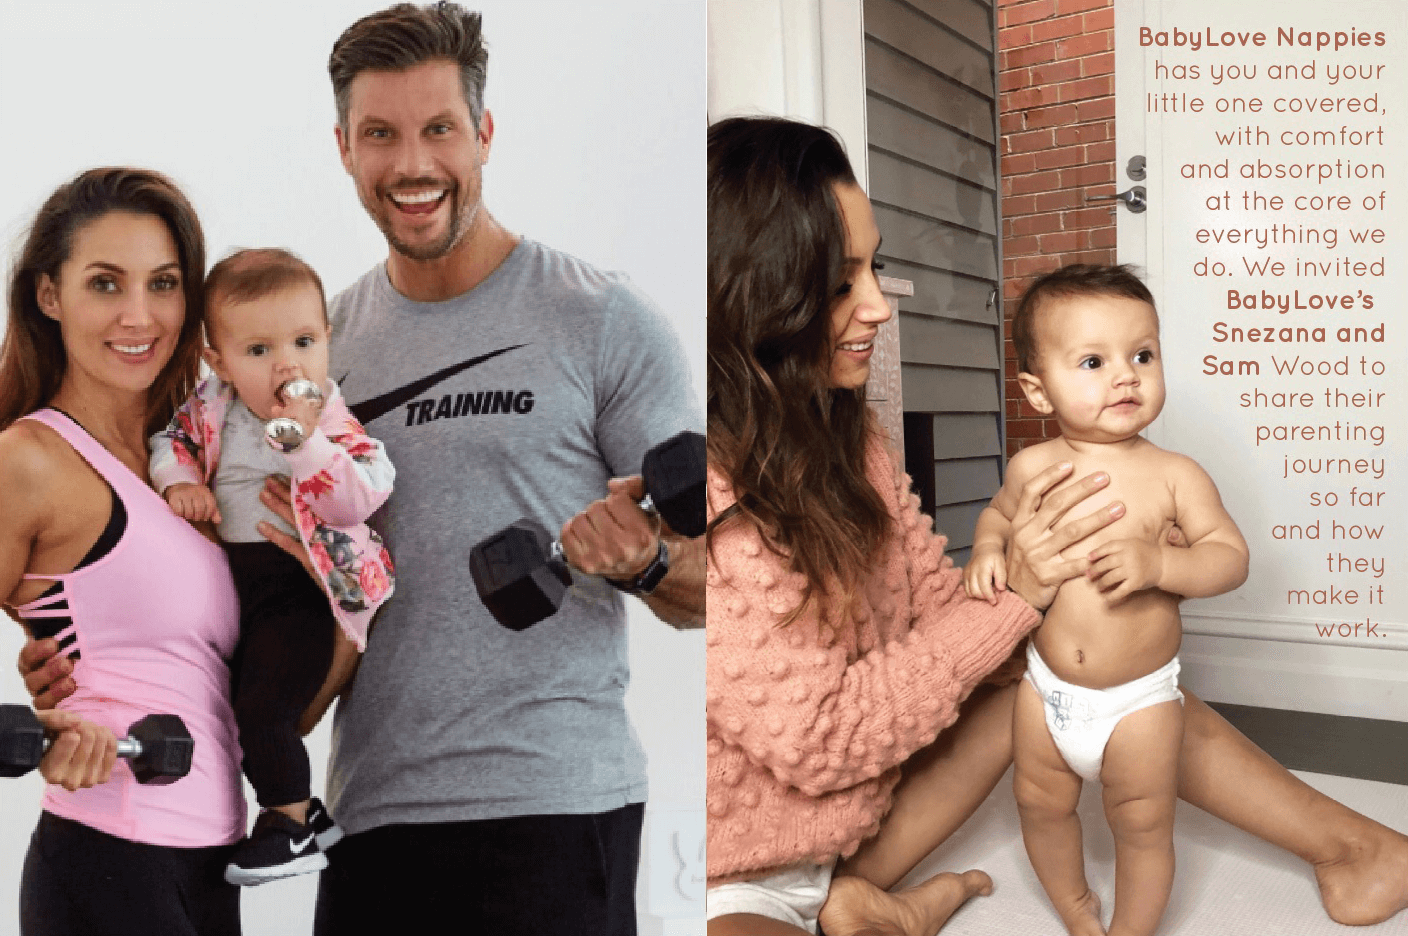 BabyLove’s Snezana and Sam Wood’s parenting journey